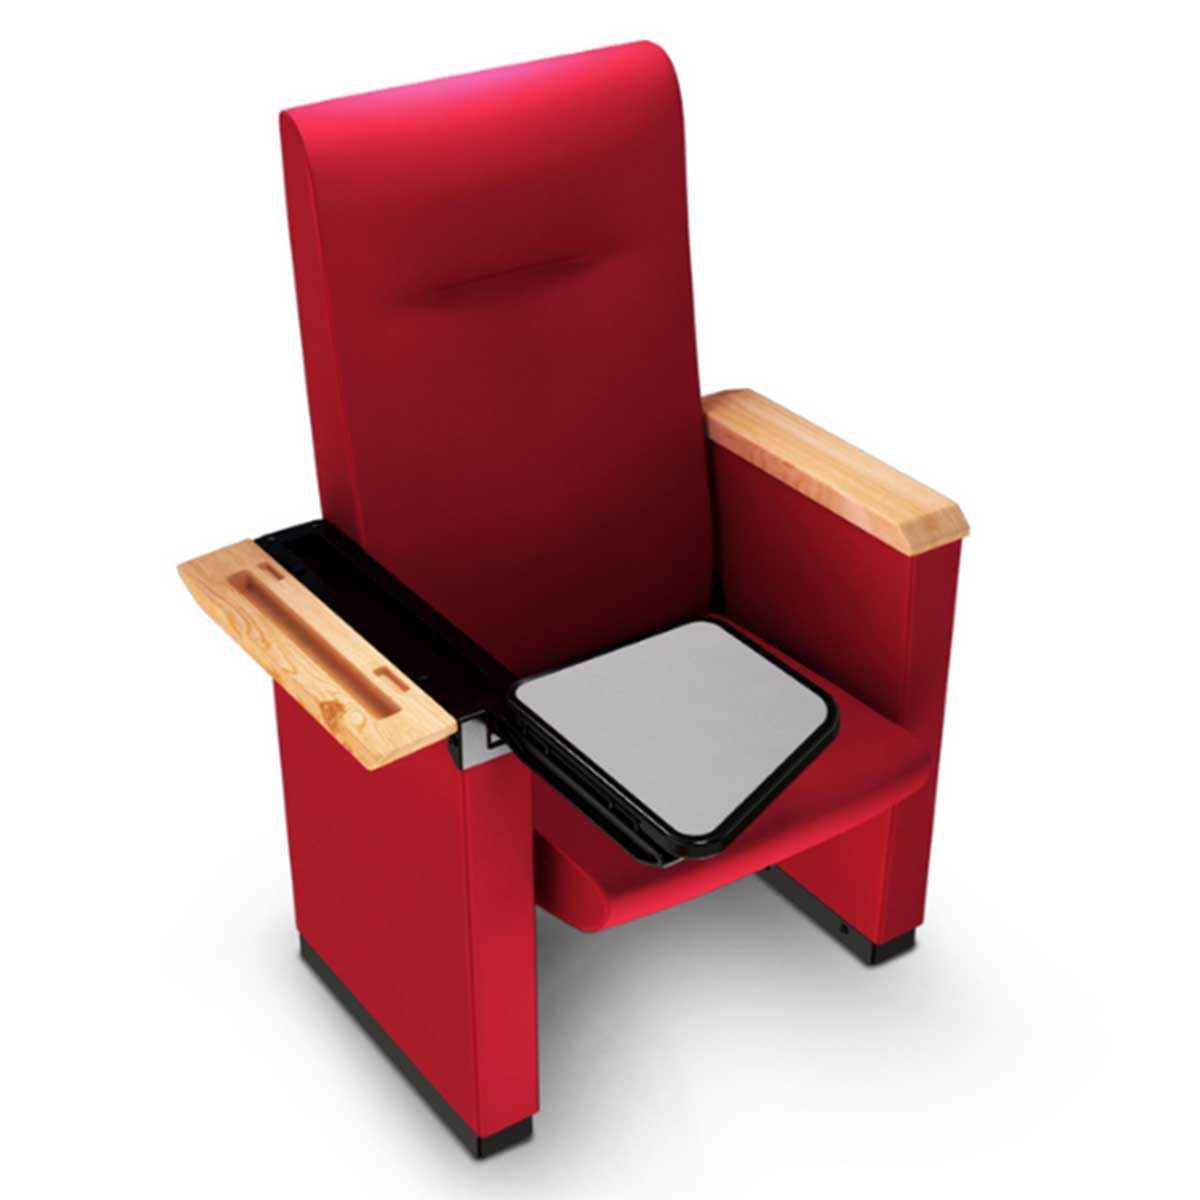 Theater Chair Manufacturers, Suppliers in Noida Sector 63